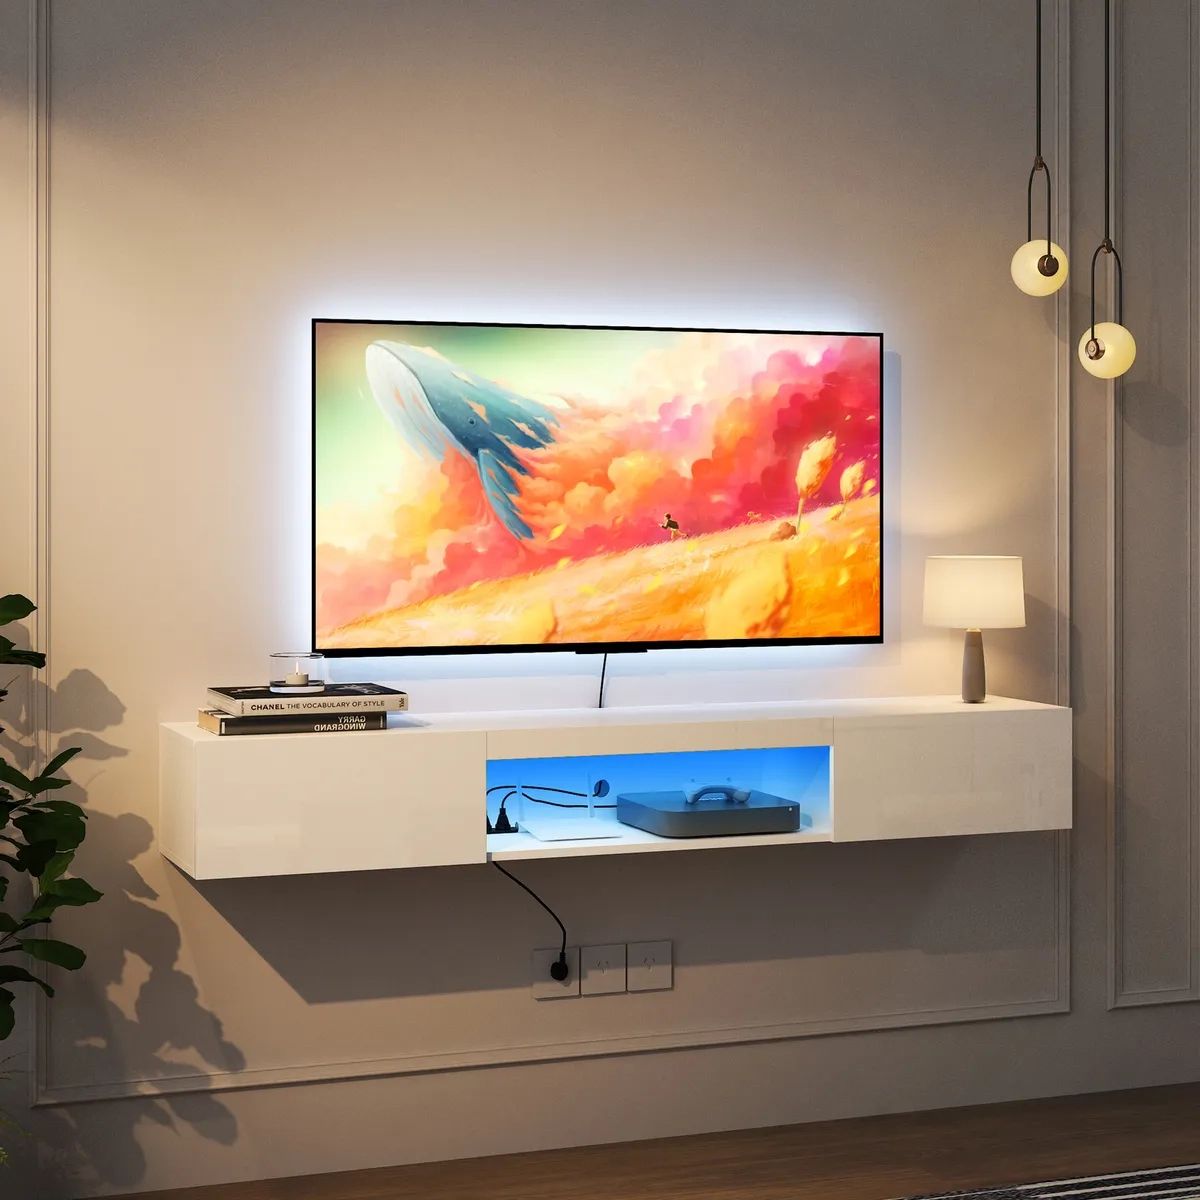 Floating Tv Stand With Led Lights & Power Outlets Wall Mounted For Tvs  Up To 65" | Ebay Pertaining To Tv Stands With Led Lights & Power Outlet (View 8 of 15)